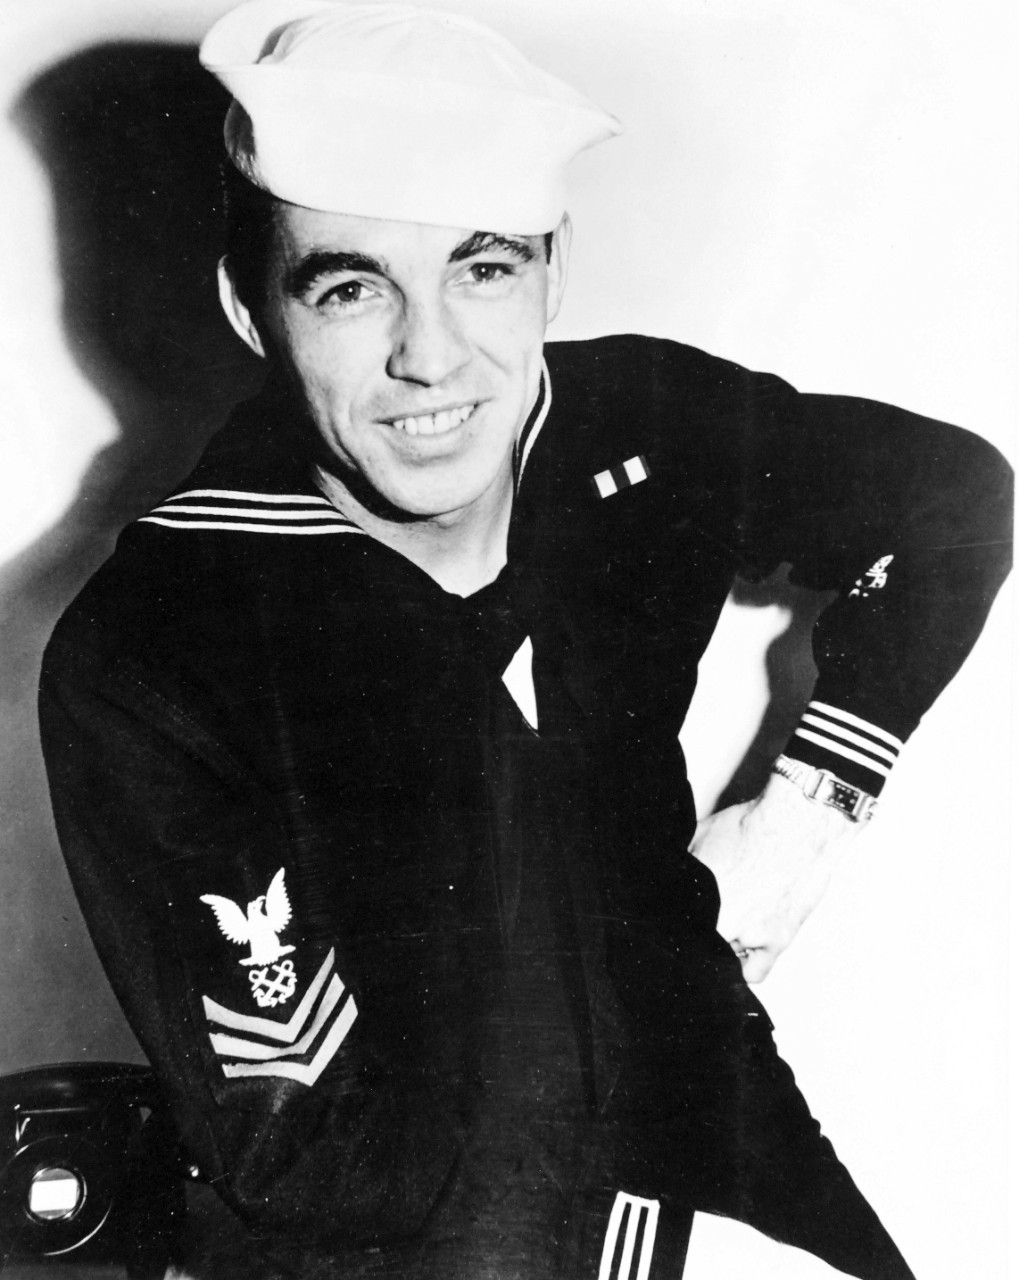 80-G-207669:  Opeartion Galvanic, November 1943.   Boatswain’s Mate First Class A.F. Wigle, survivor from USS Liscome Bay (CVE-56), November 24, 1943.  Photographed January 5, 1944.     Official U.S. Navy Photograph, now in the collections of the National Archives.  (2017/06/27).